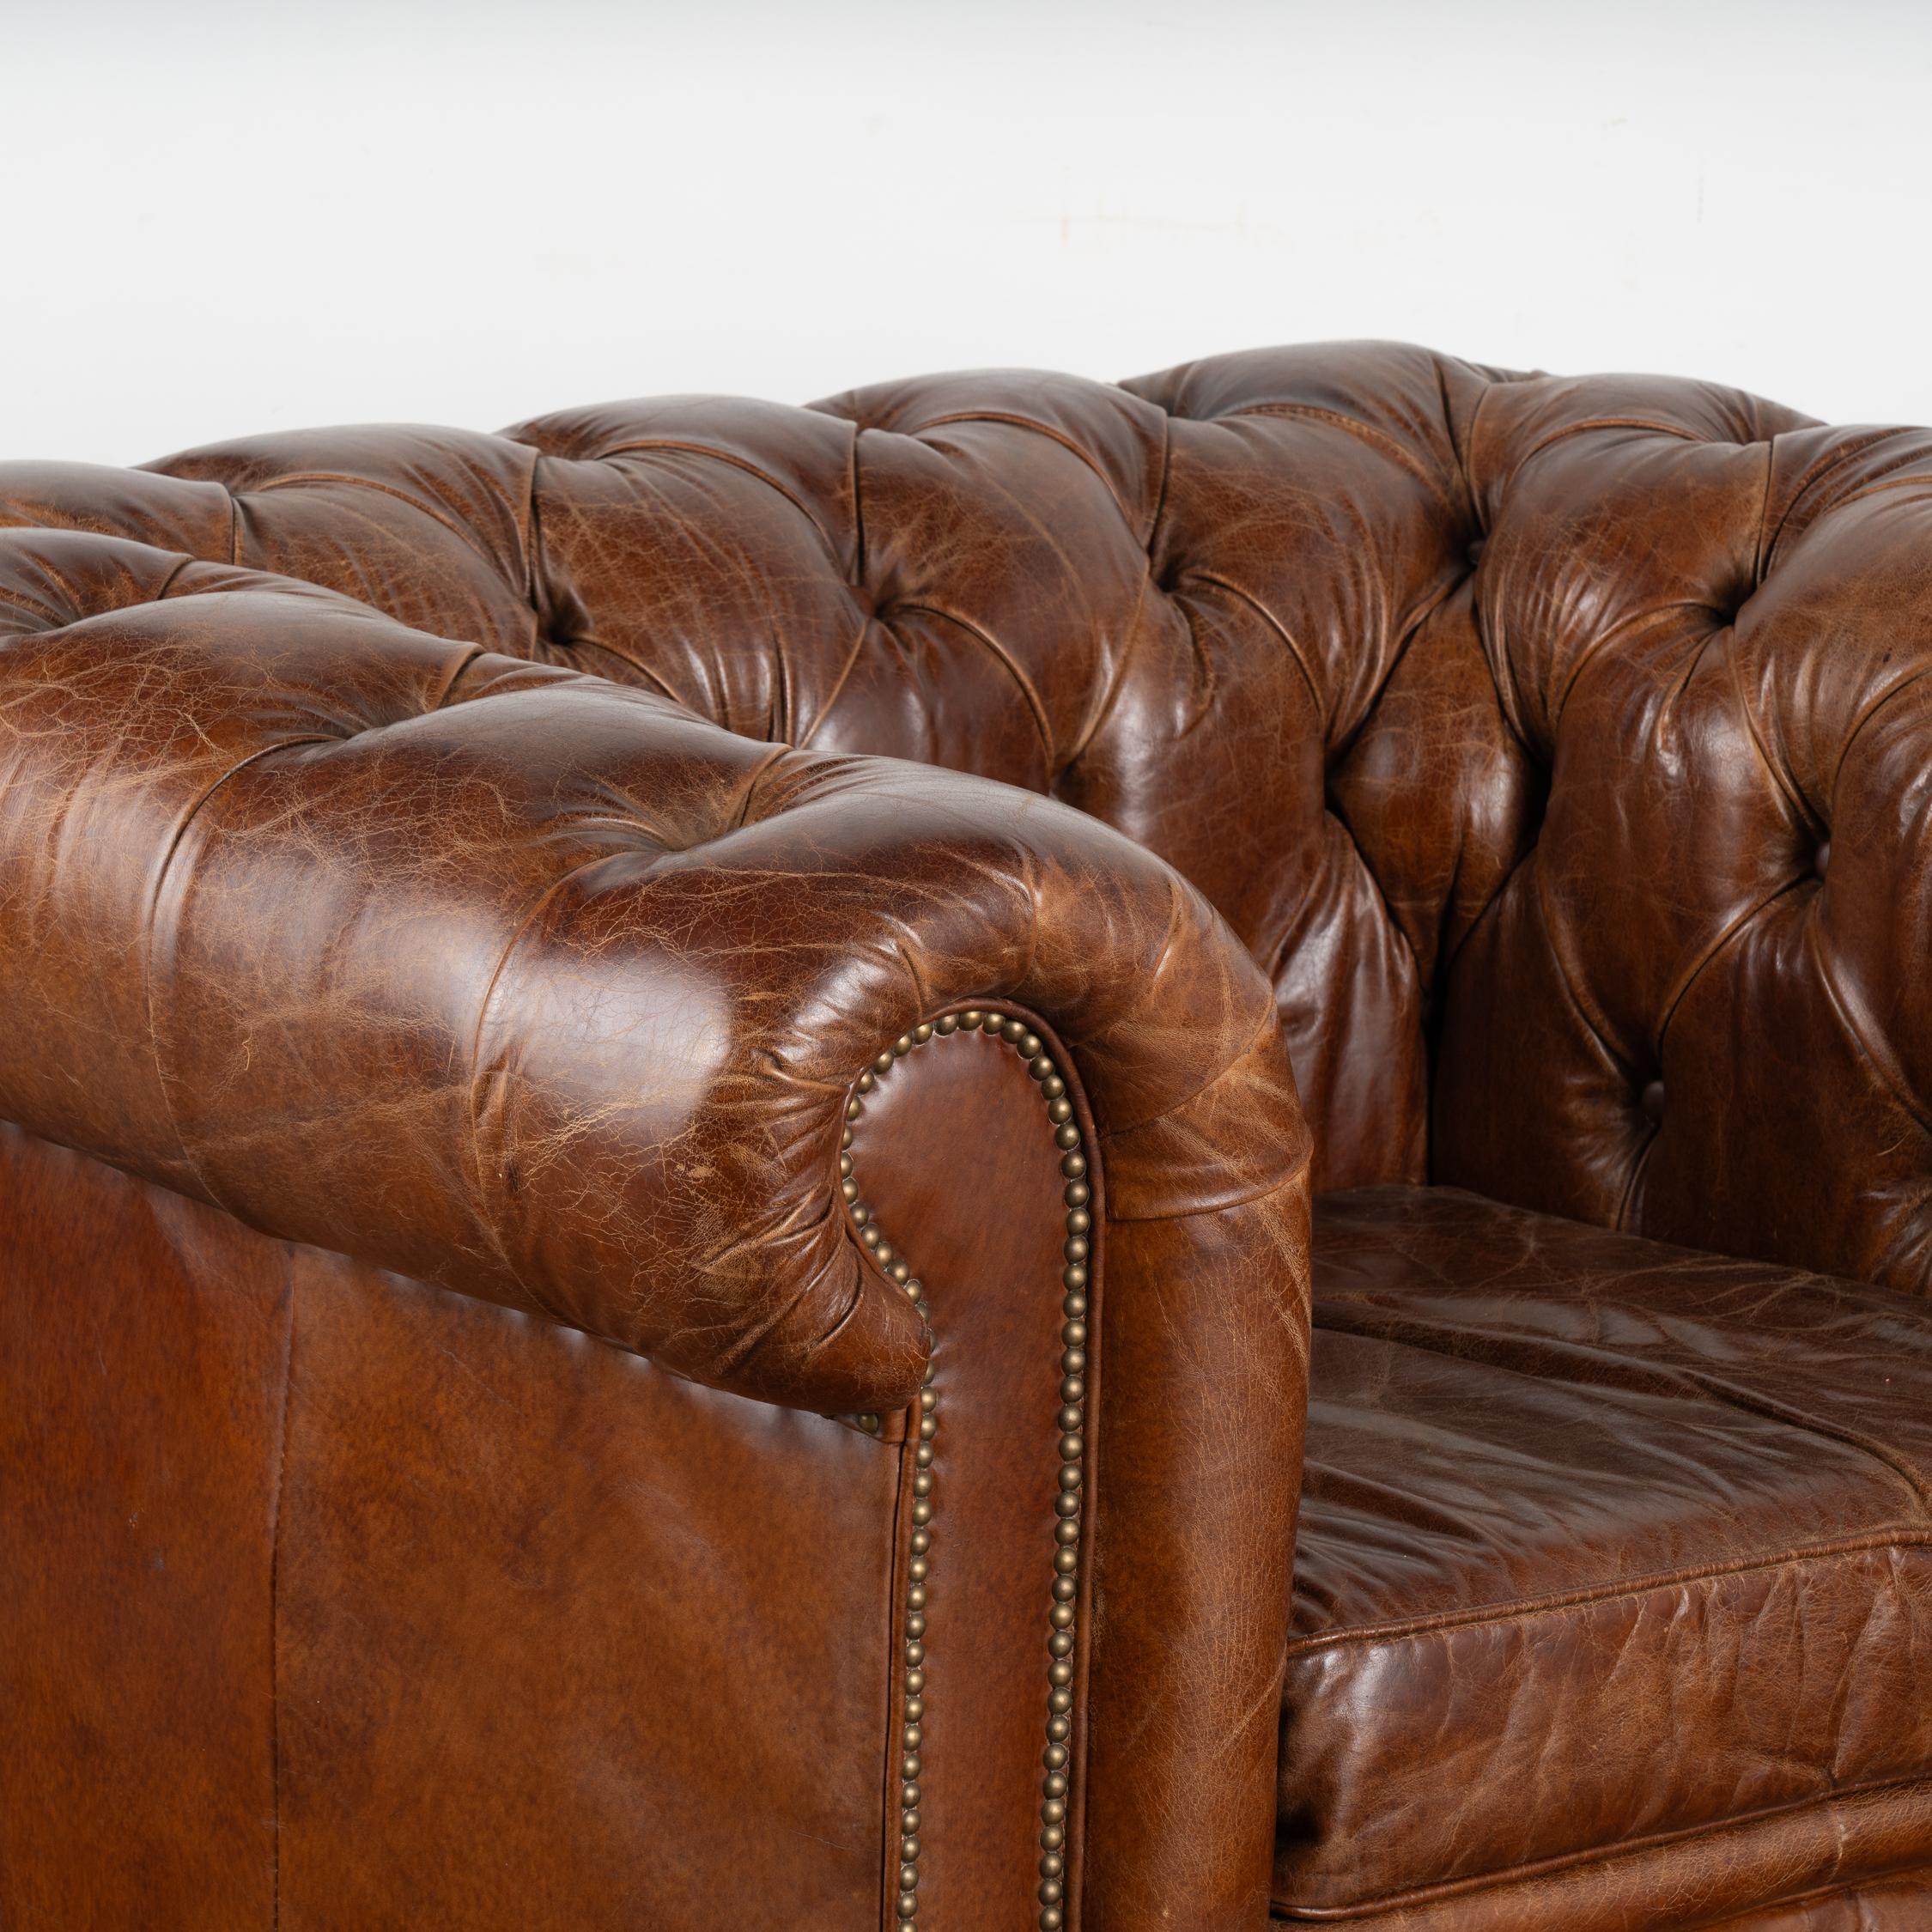 Pair, Vintage Brown Leather Chesterfield Club Arm Chairs, England circa 1970-80 1